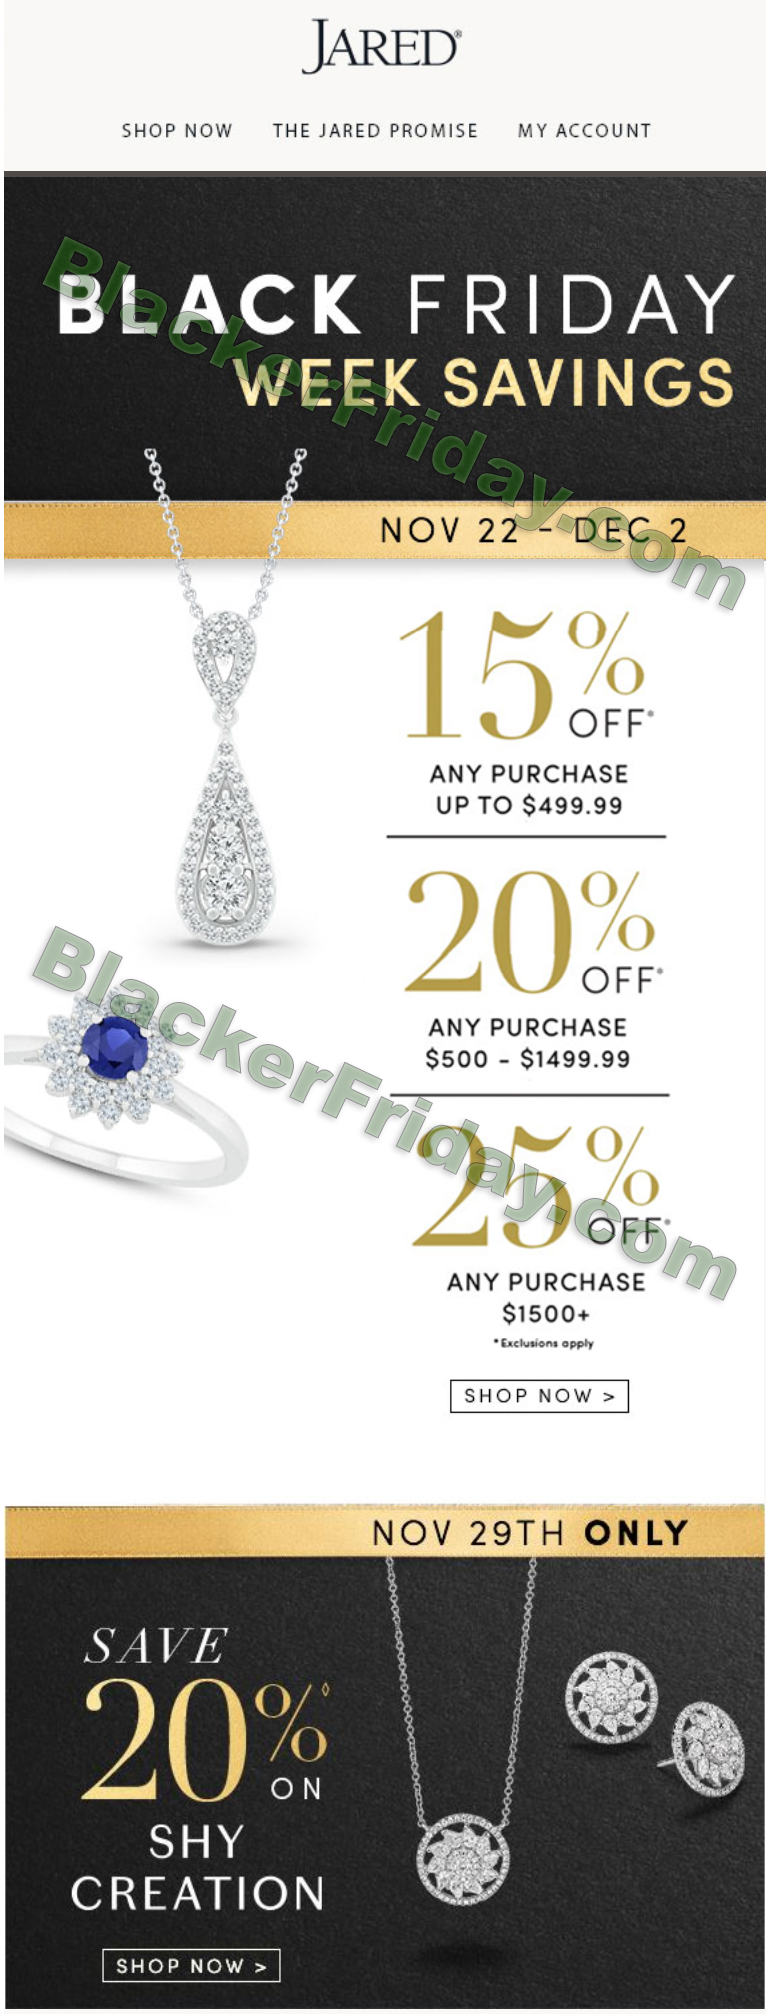 Jared Jewelers Black Friday 2020 Sale What To Expect Blacker Friday